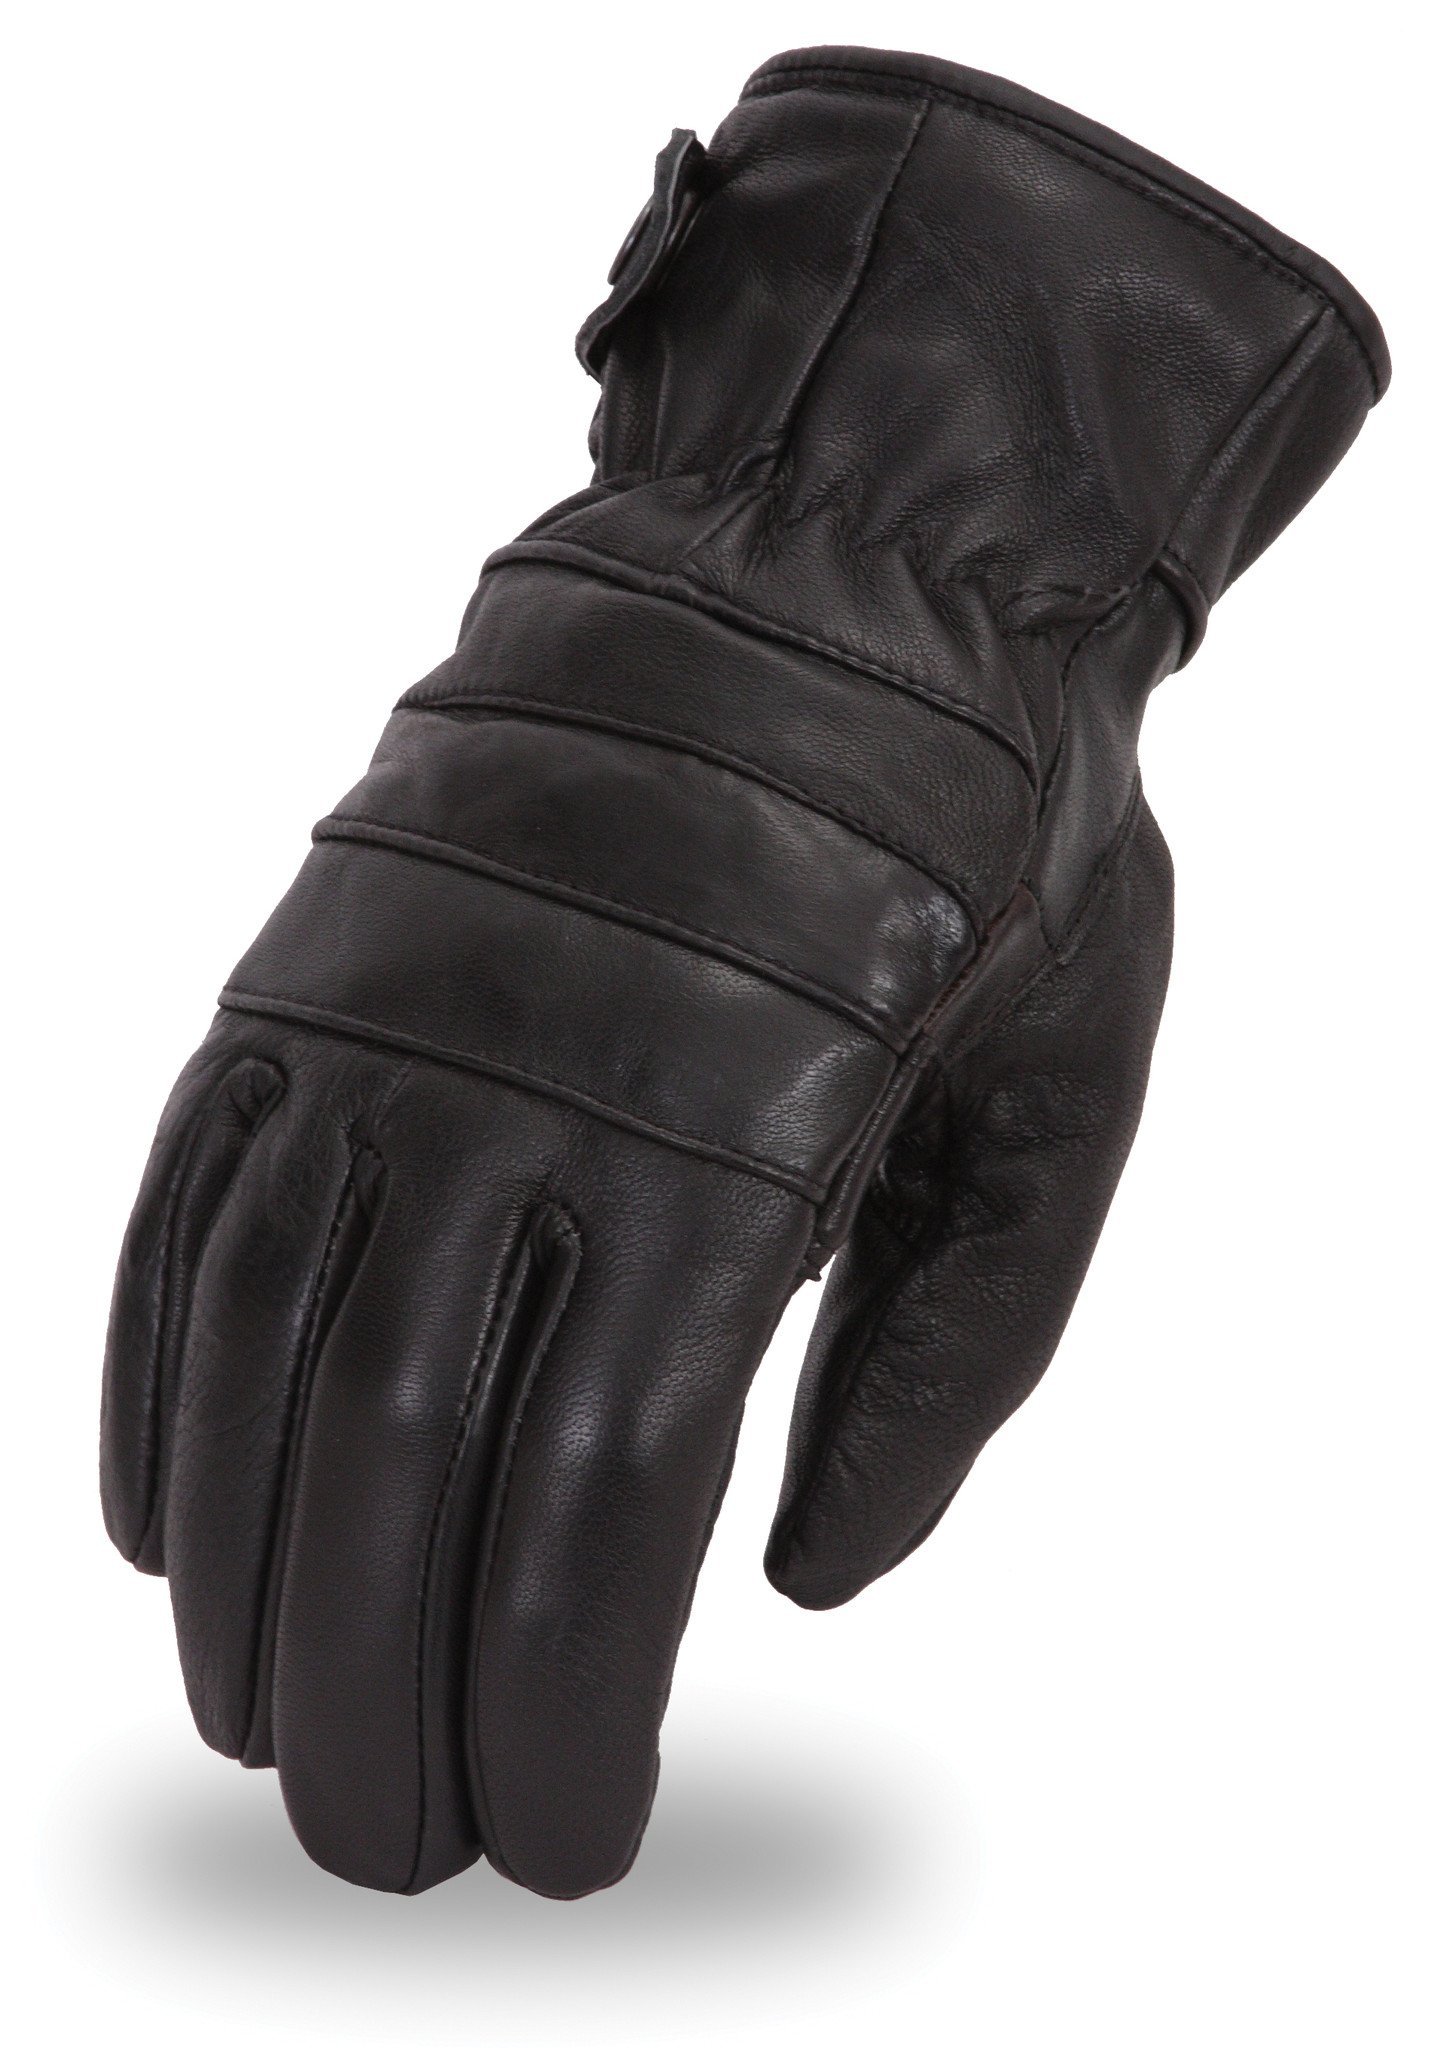 Men's Performance Insulated Touring Gloves - Sheep Leather - SKU FI174GL-FM